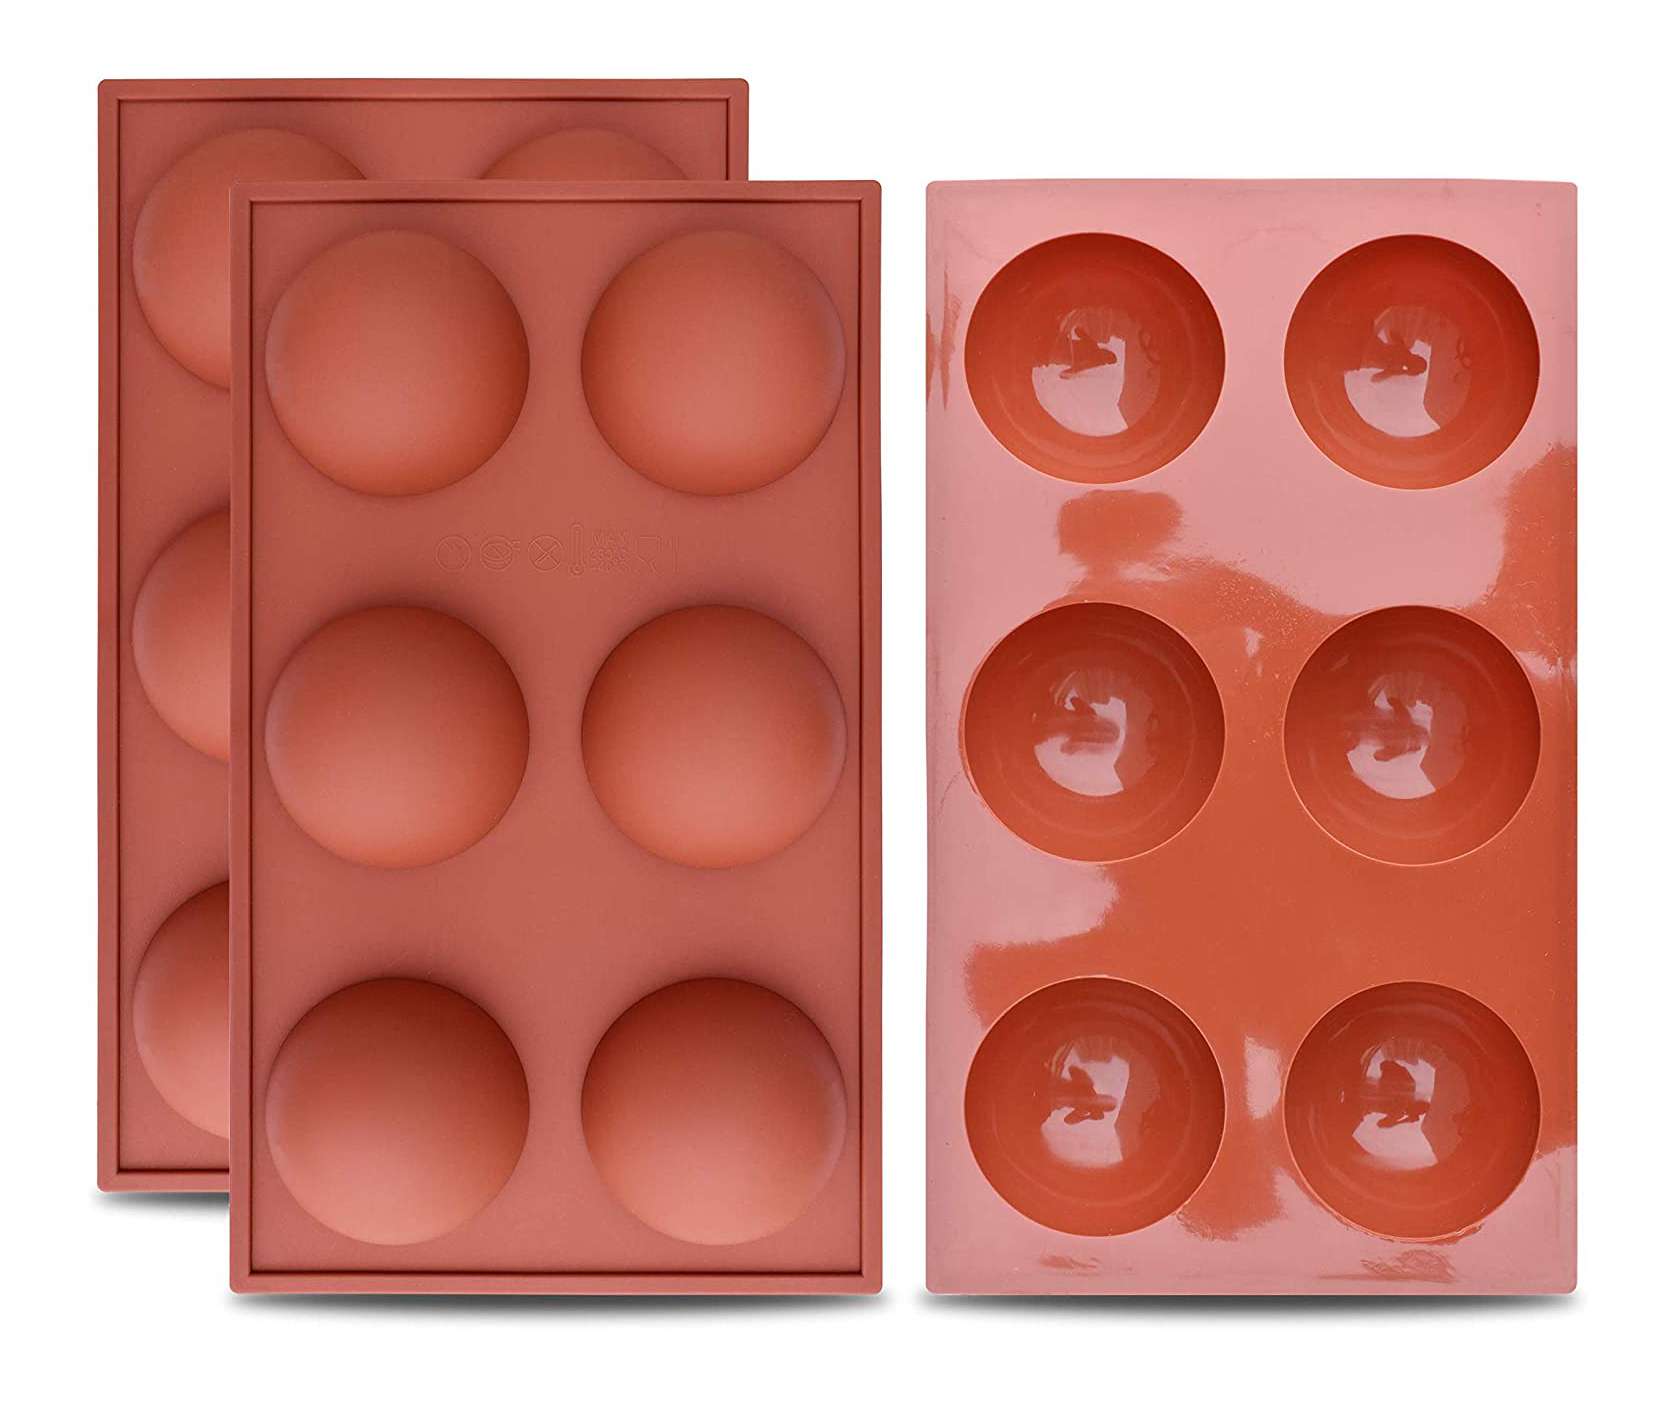 Dome Mousse Silicone Chocolate Molds,3 Packs Baking Molds for Making Chocolate Jelly 6 Cups, 15 Cups and 24 Cups Cake Semi Sphere Silicone Mold 